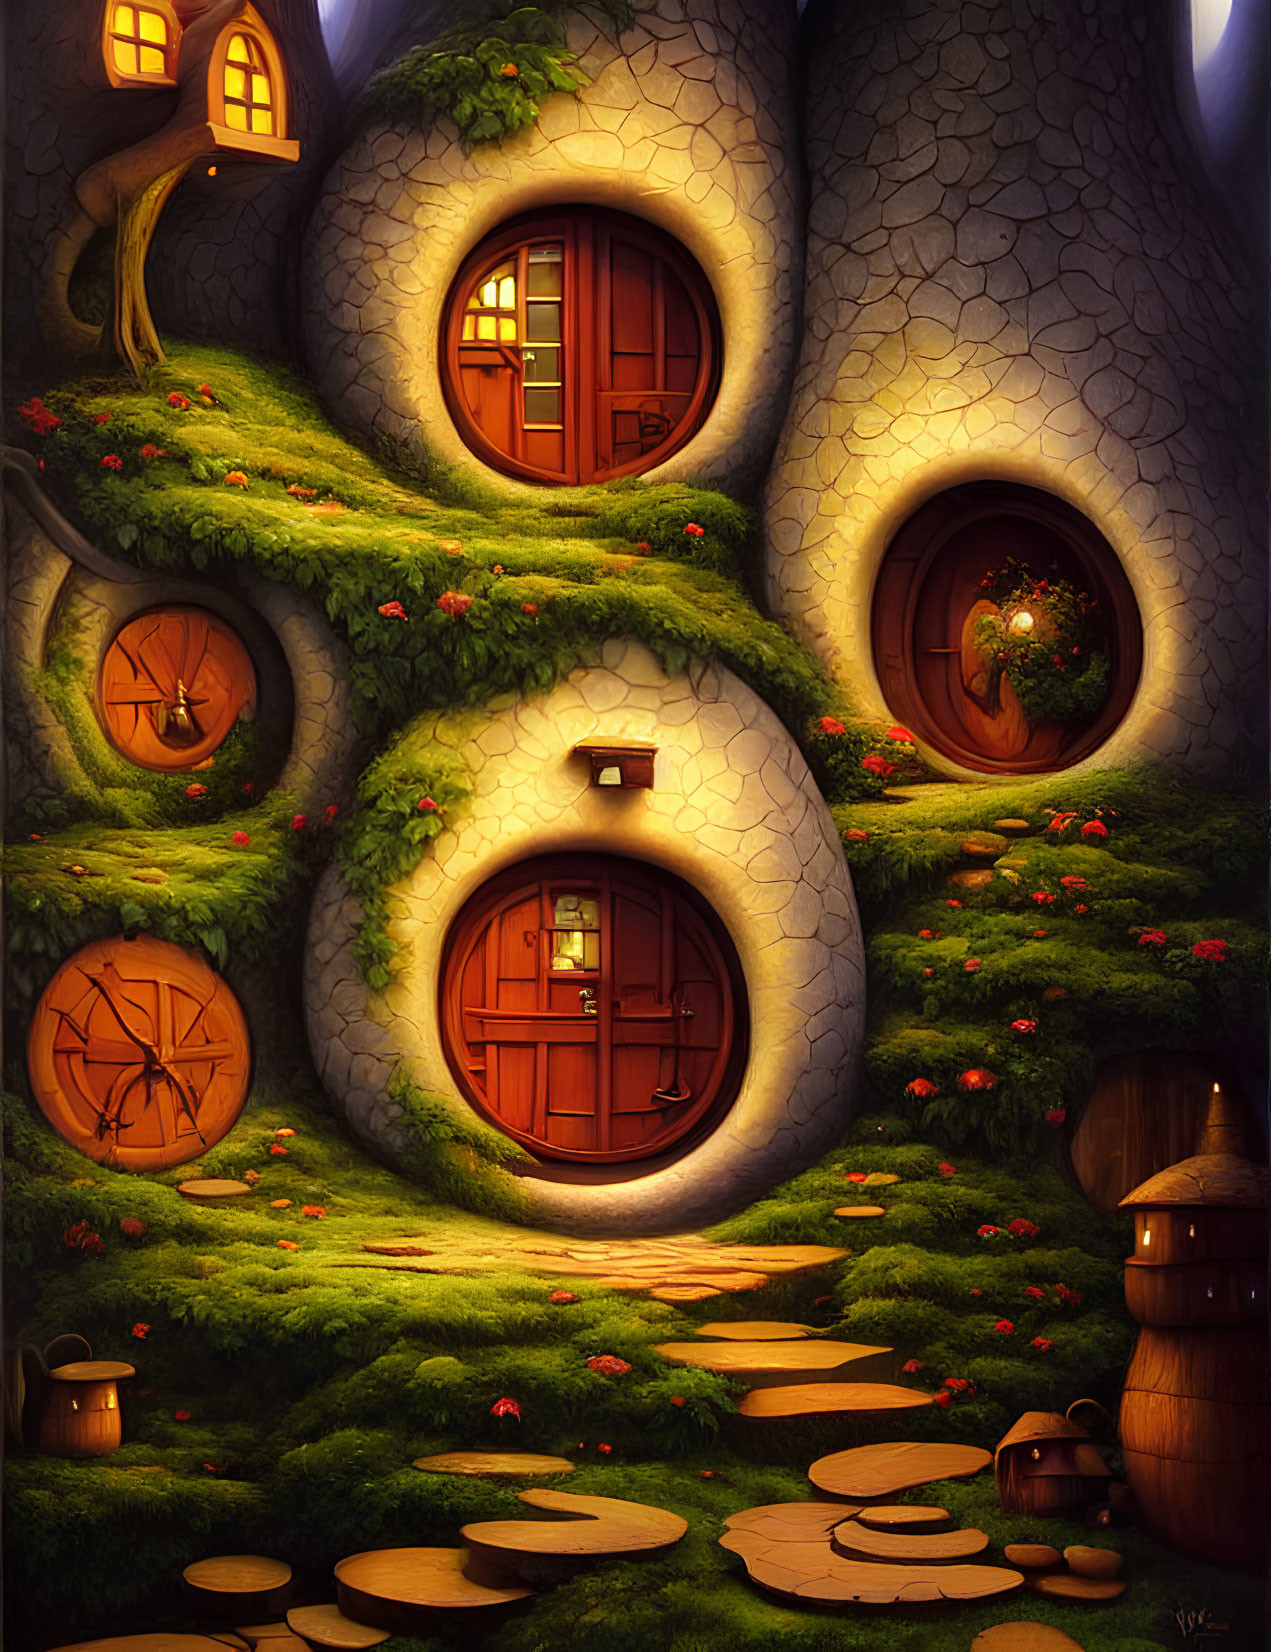 Magical treehouse with round doors, windows, stone pathway, and warm lights